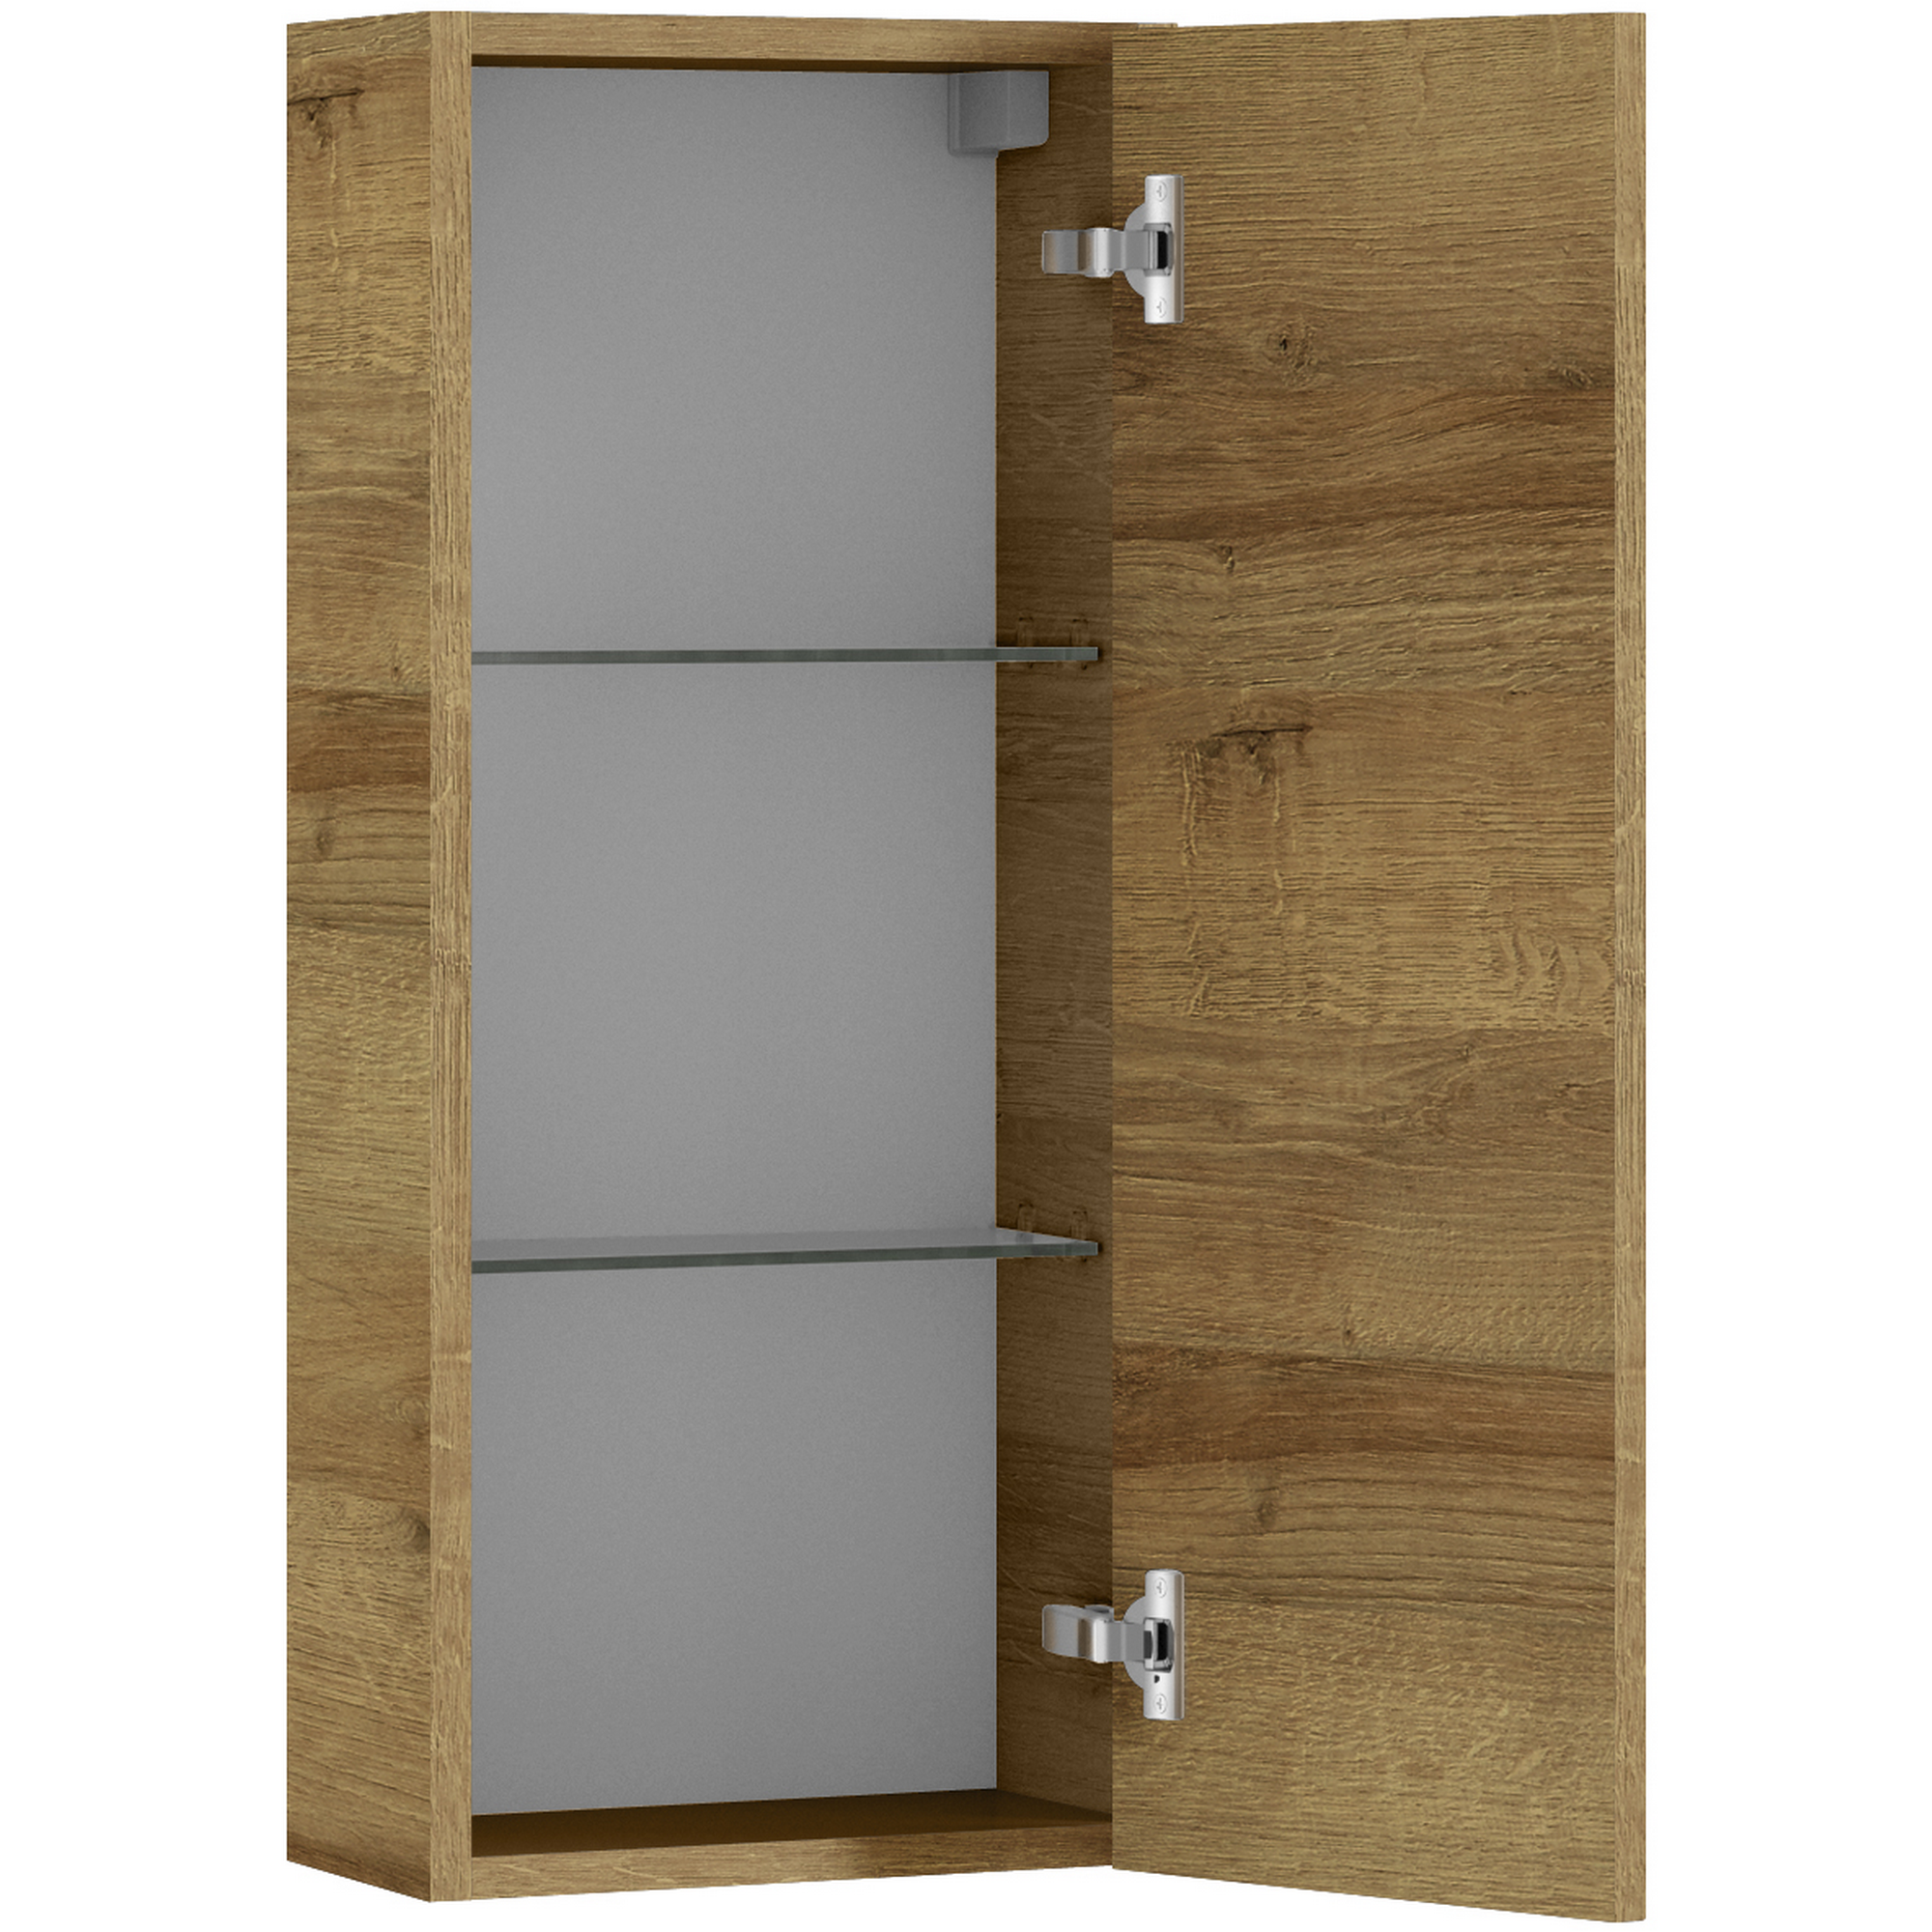 Wandschrank 'Indra' Riviera Eiche 30 x 70 x 17 cm + product picture